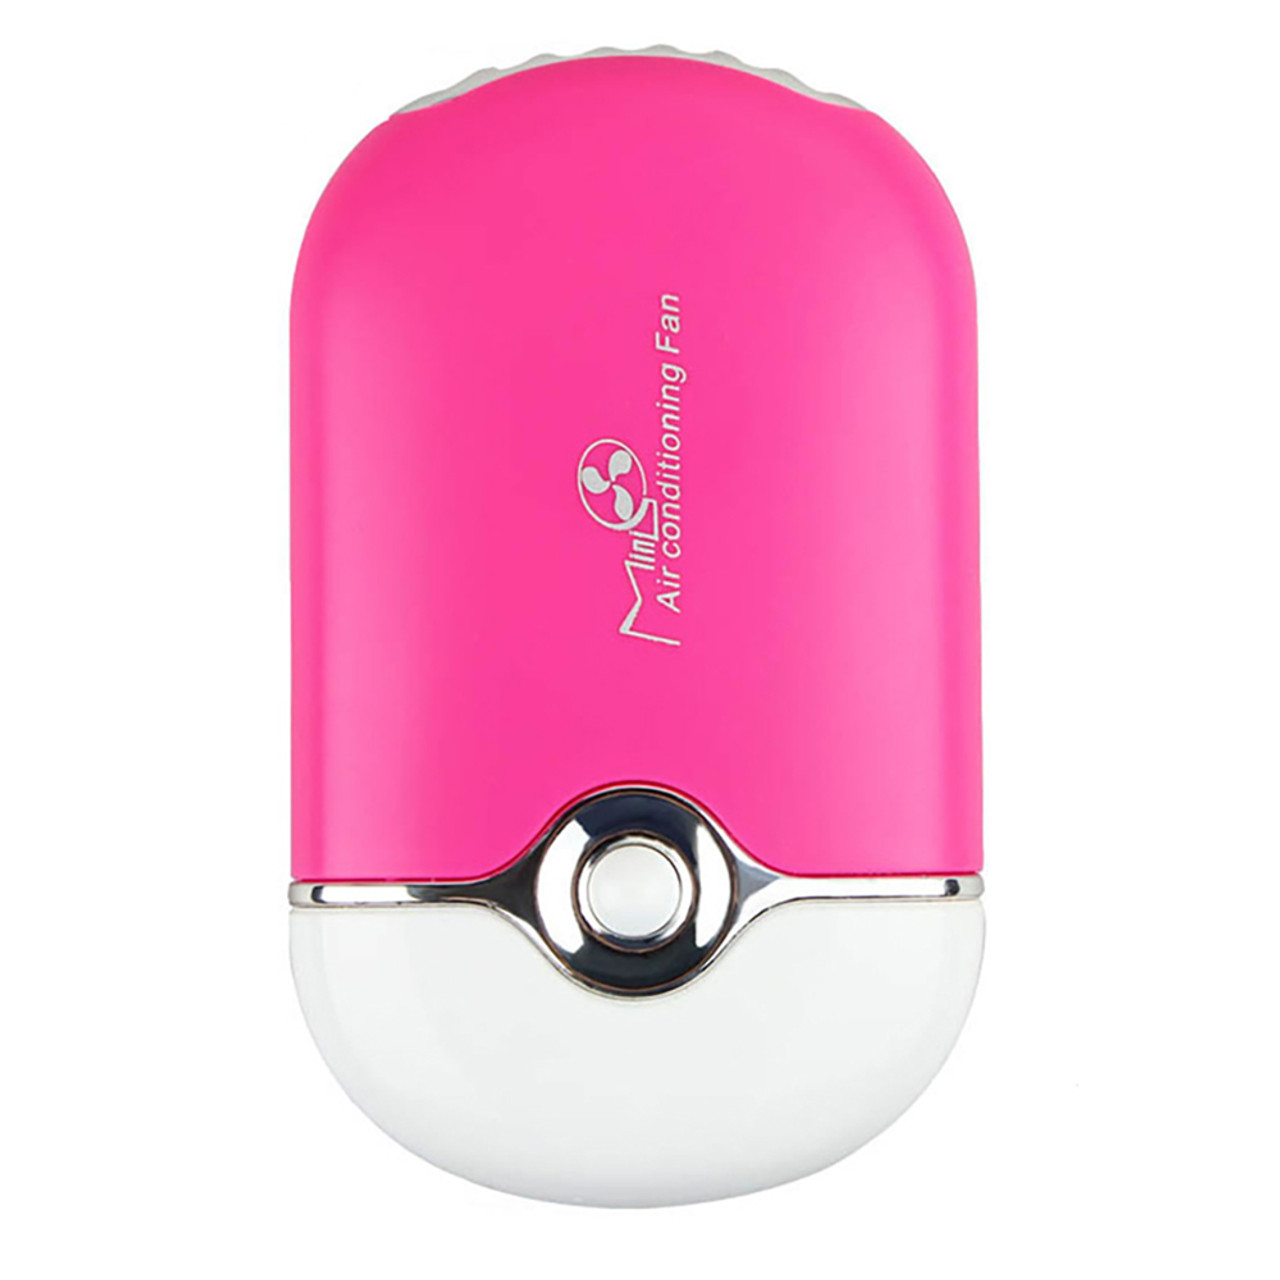 Mini Handheld Portable USB Air Conditioning Fan product image